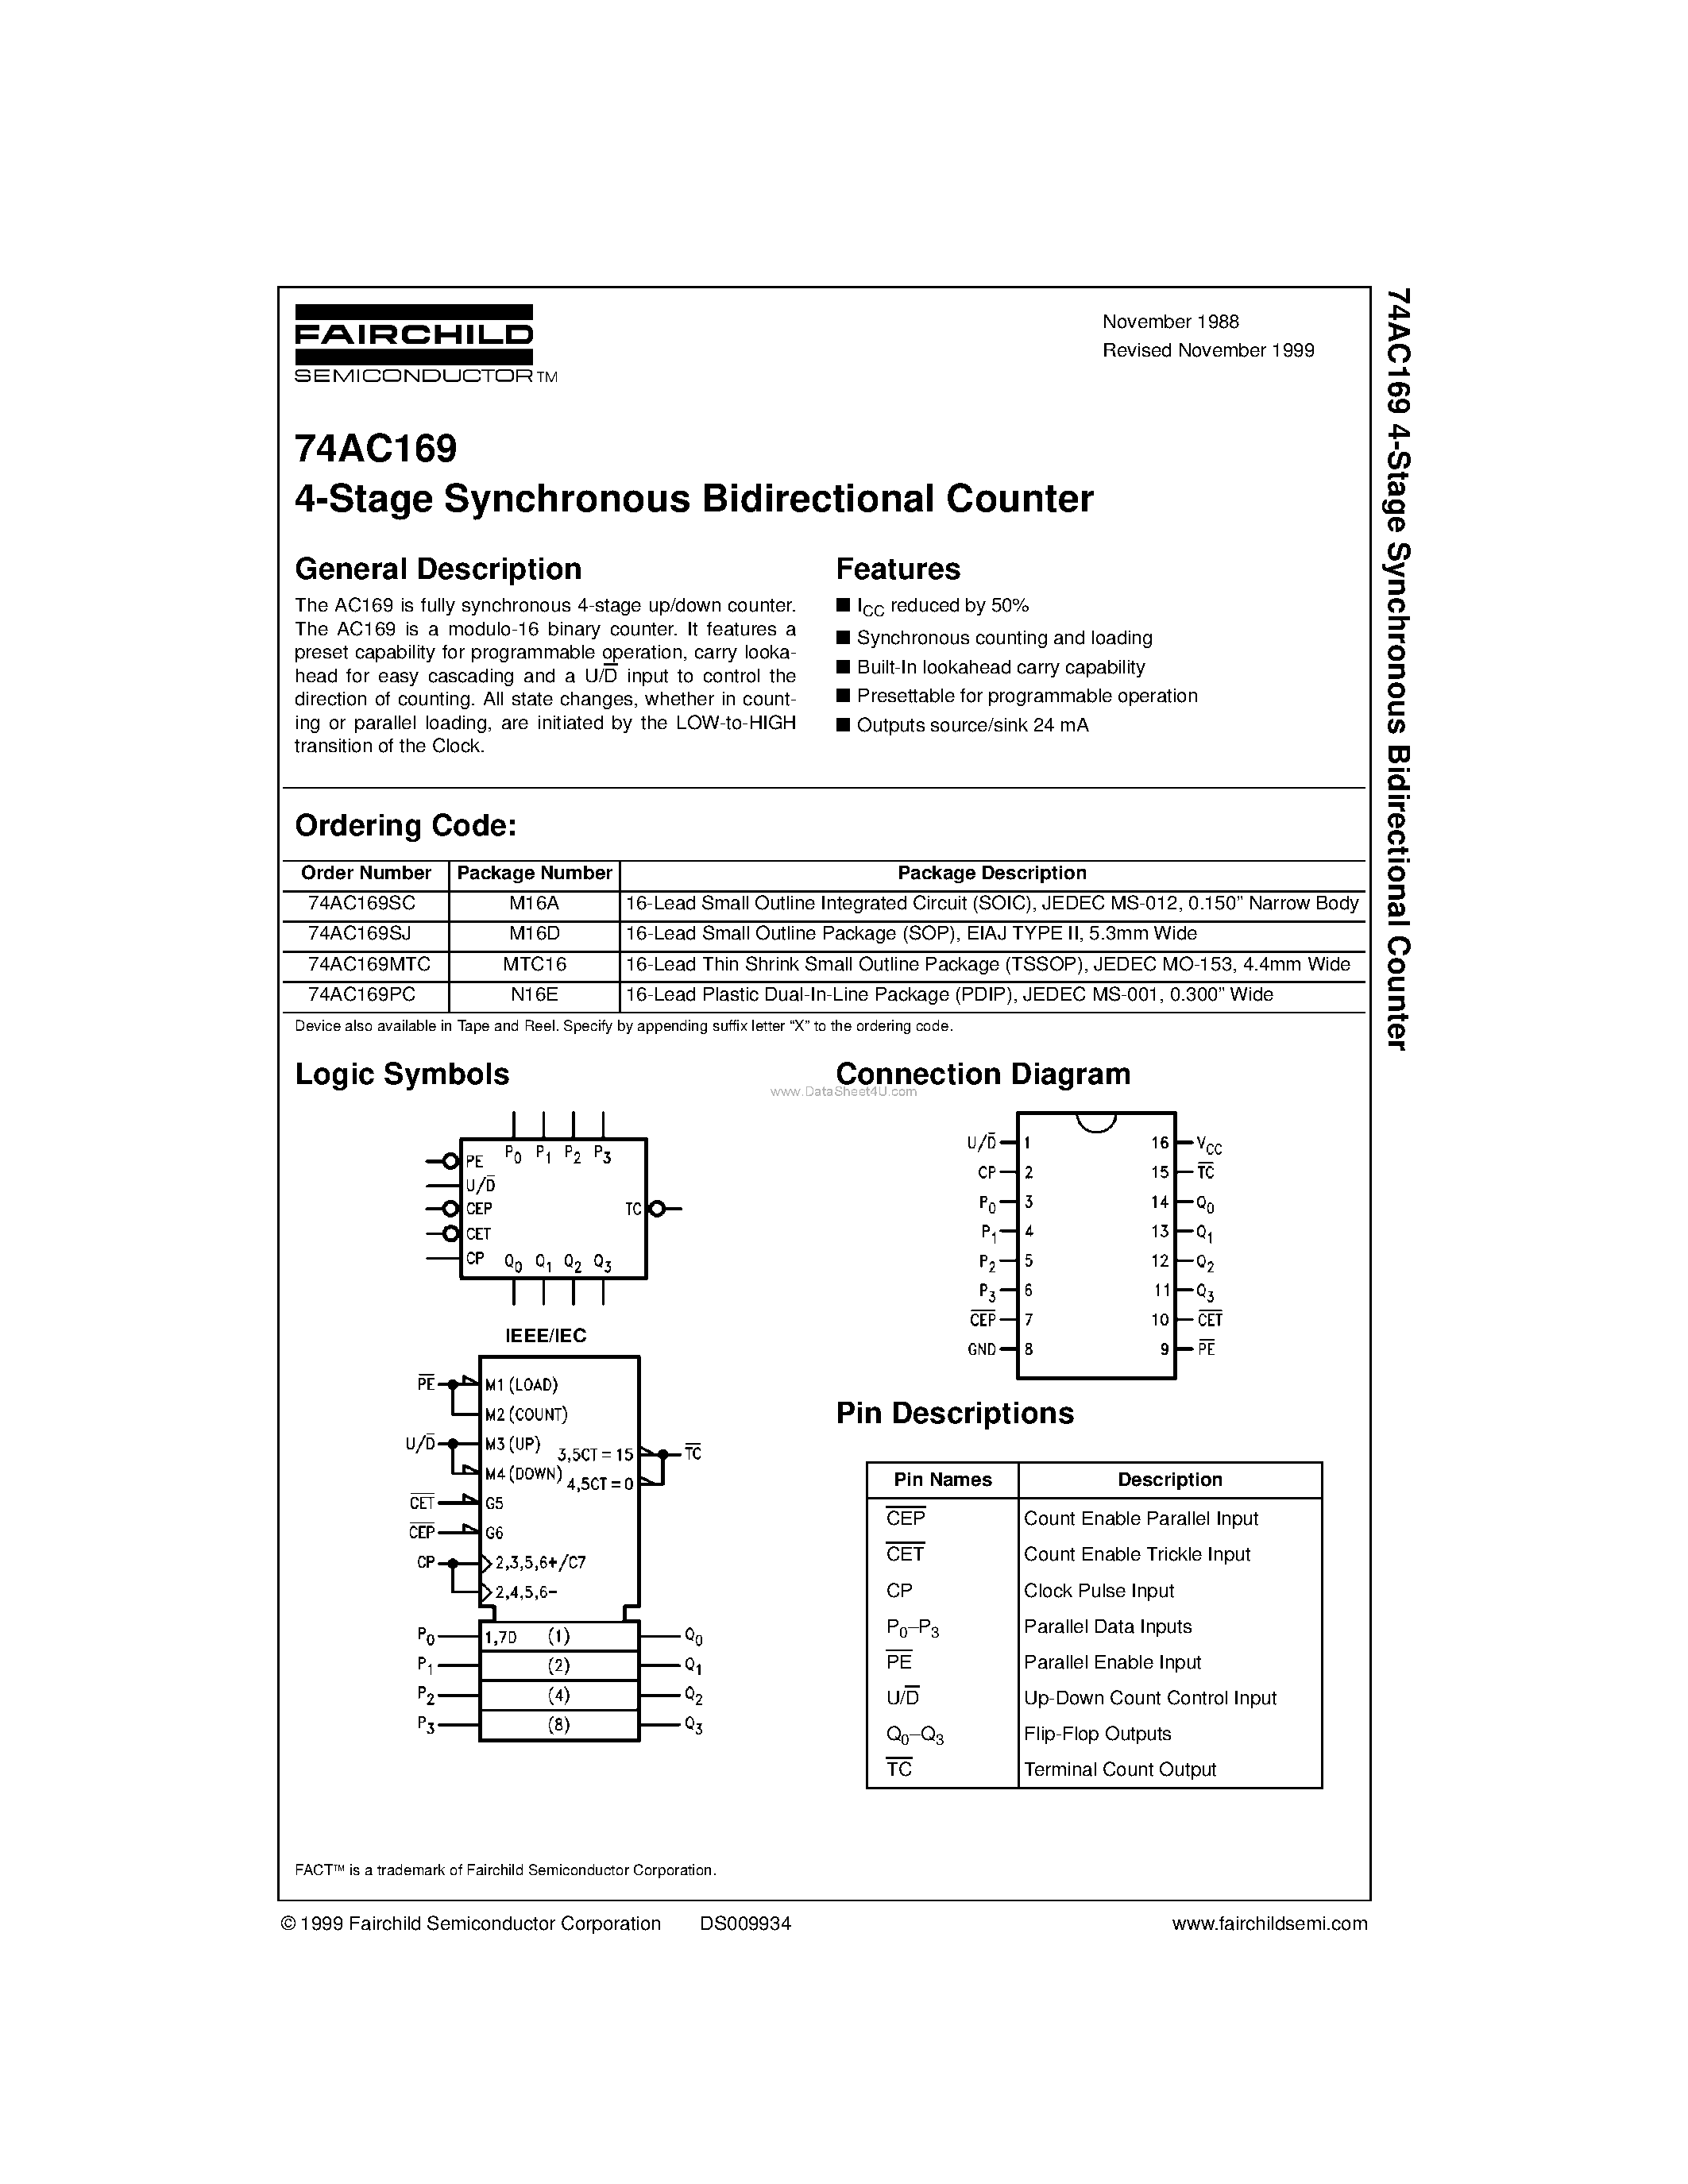 Datasheet 74AC169 - 4-Stage Synchronous Bidirectional Counter page 1